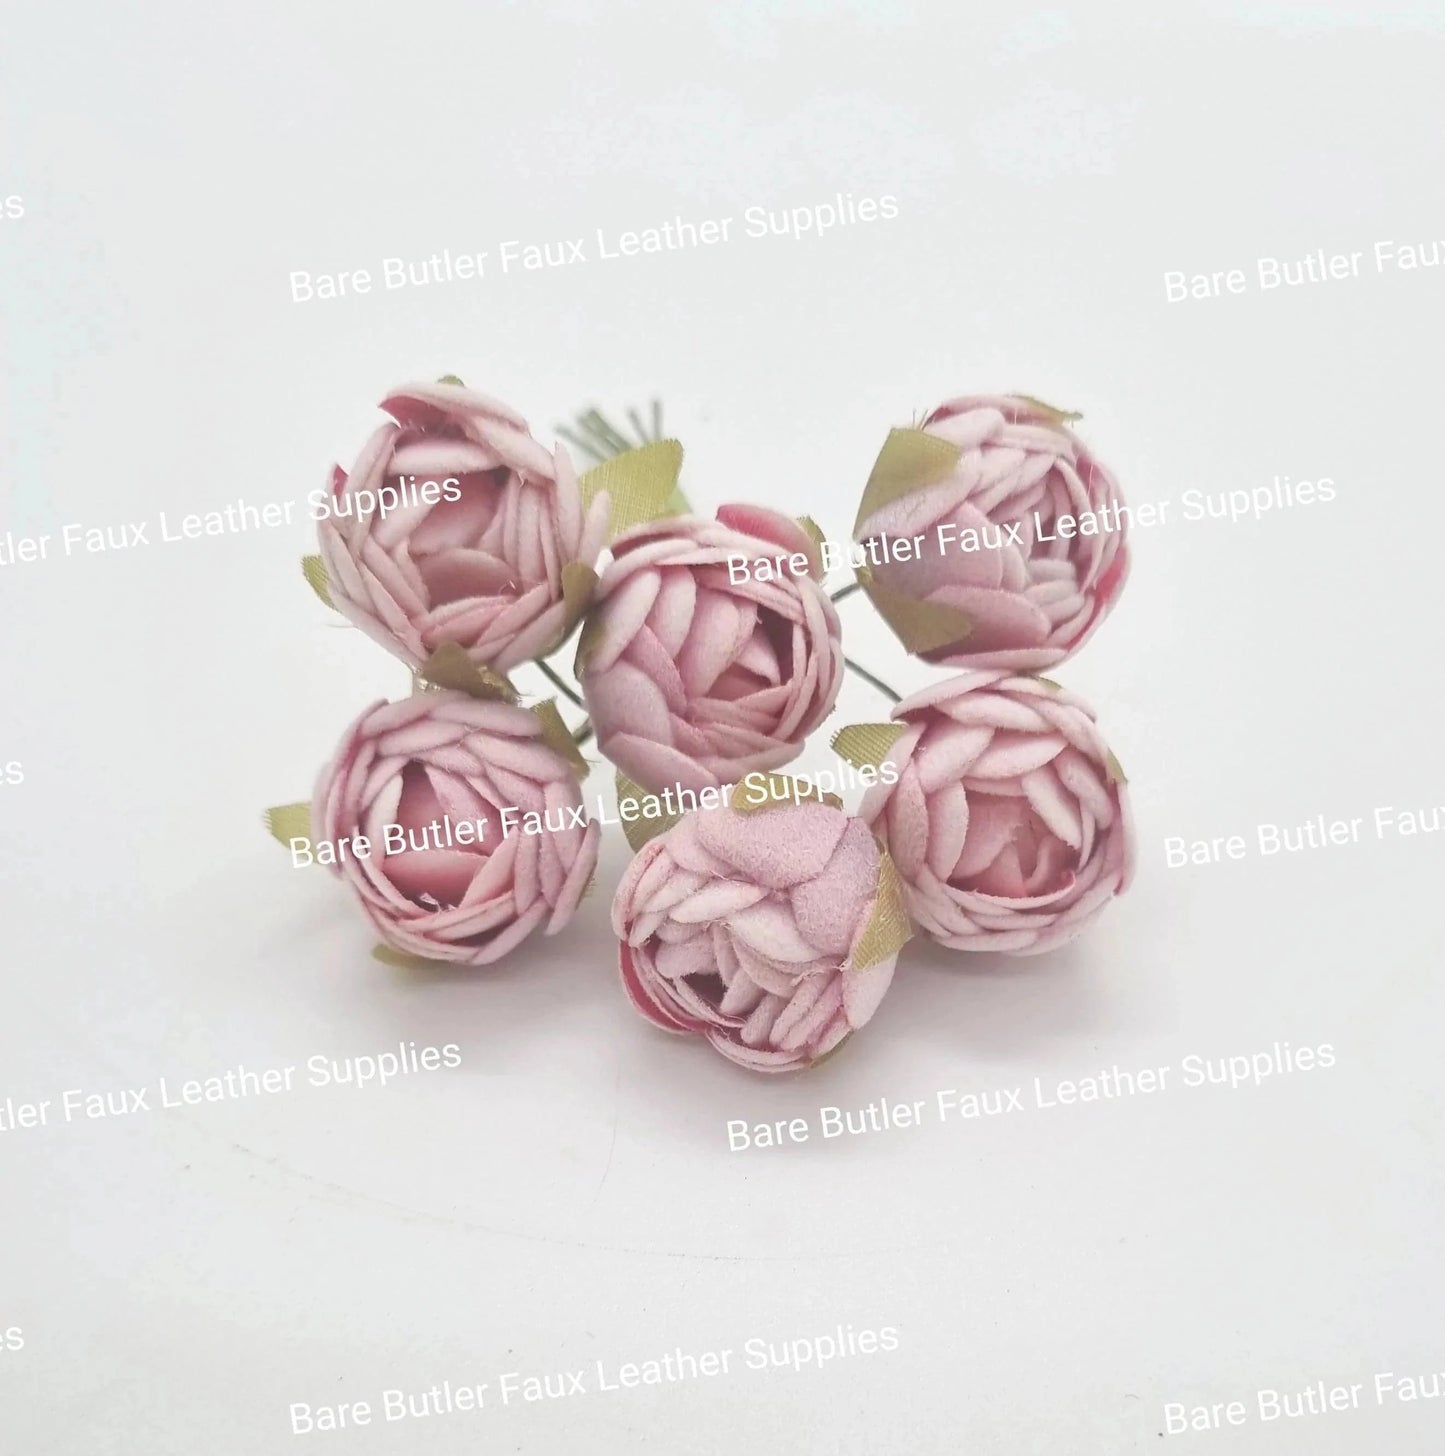 Mini Silk Rose Buds Pink - 6 pack - Embelishment, Flower - Bare Butler Faux Leather Supplies 